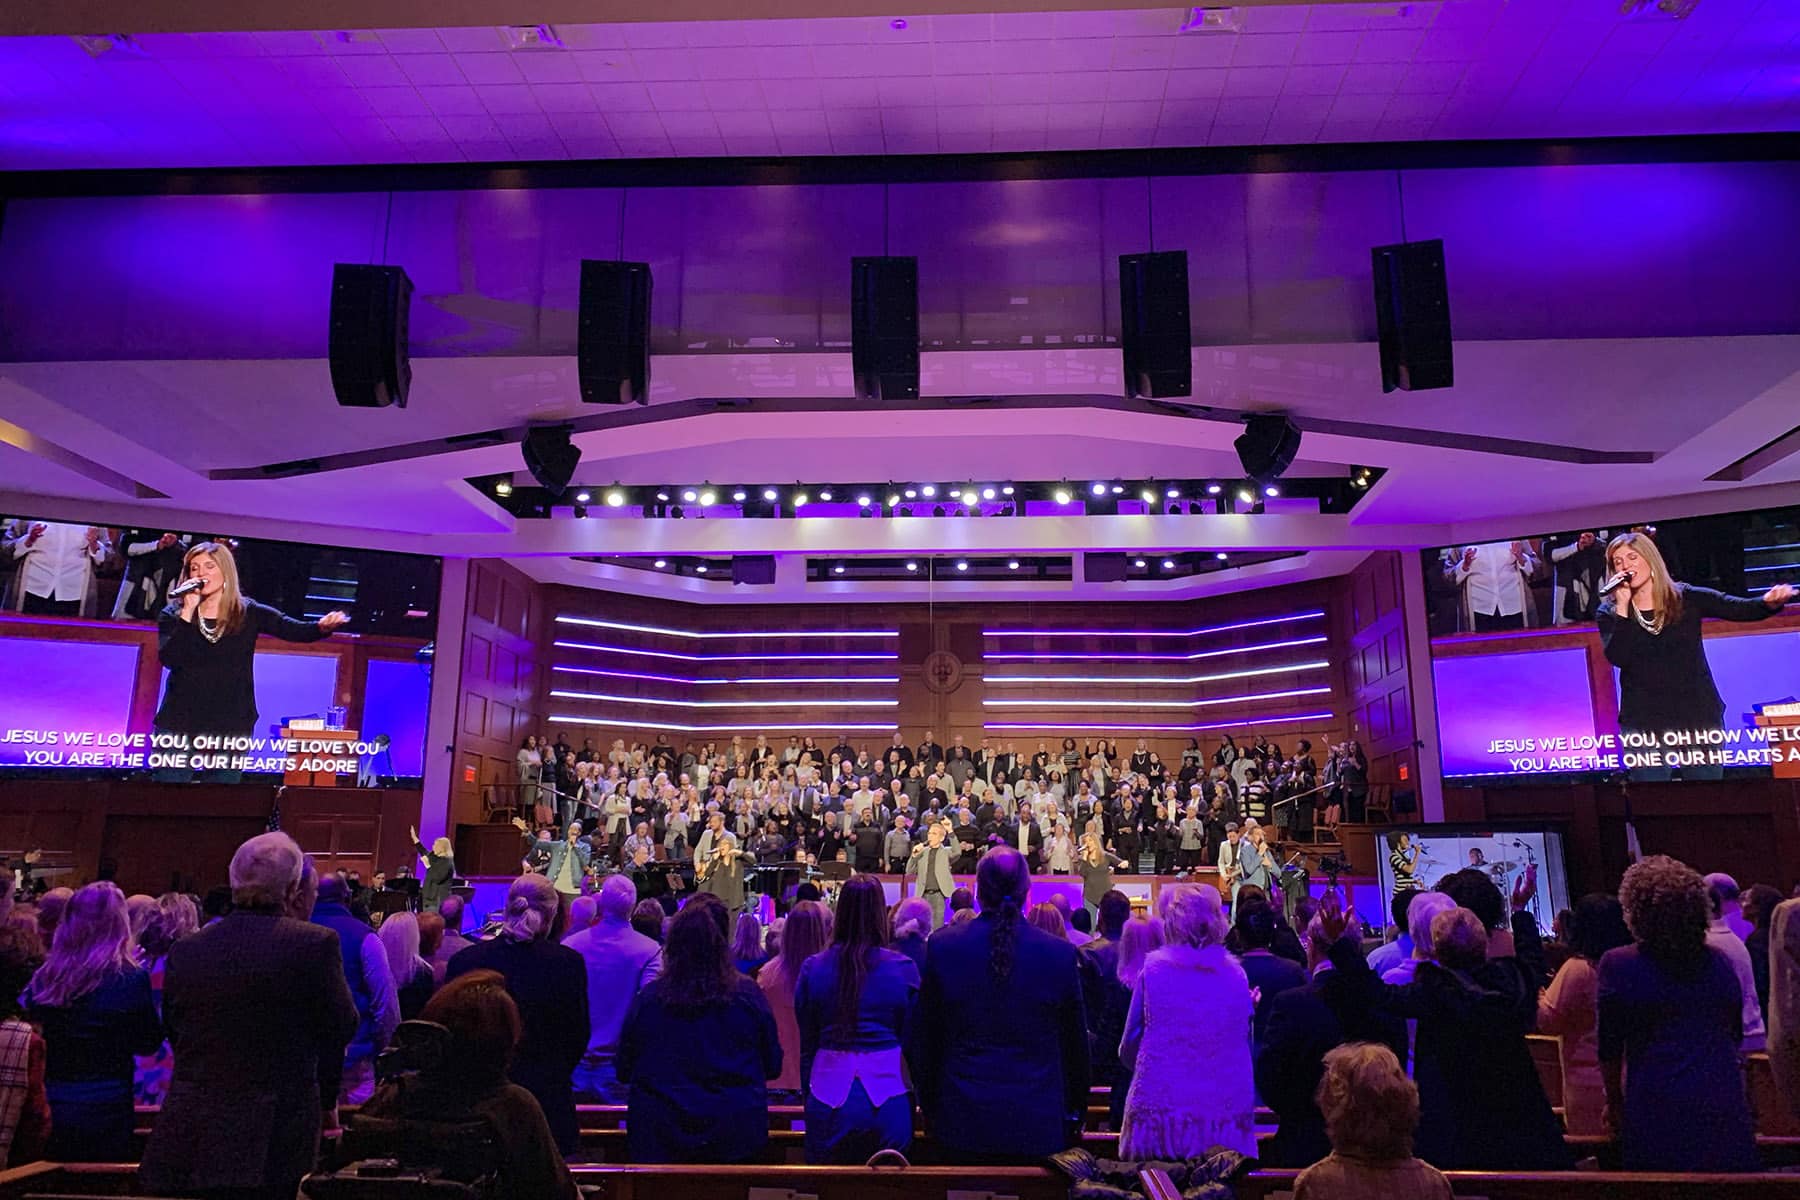 Atlanta’s Mount Paran Church Becomes First House of Worship to Install L-ISA Hyperreal Sound Technology